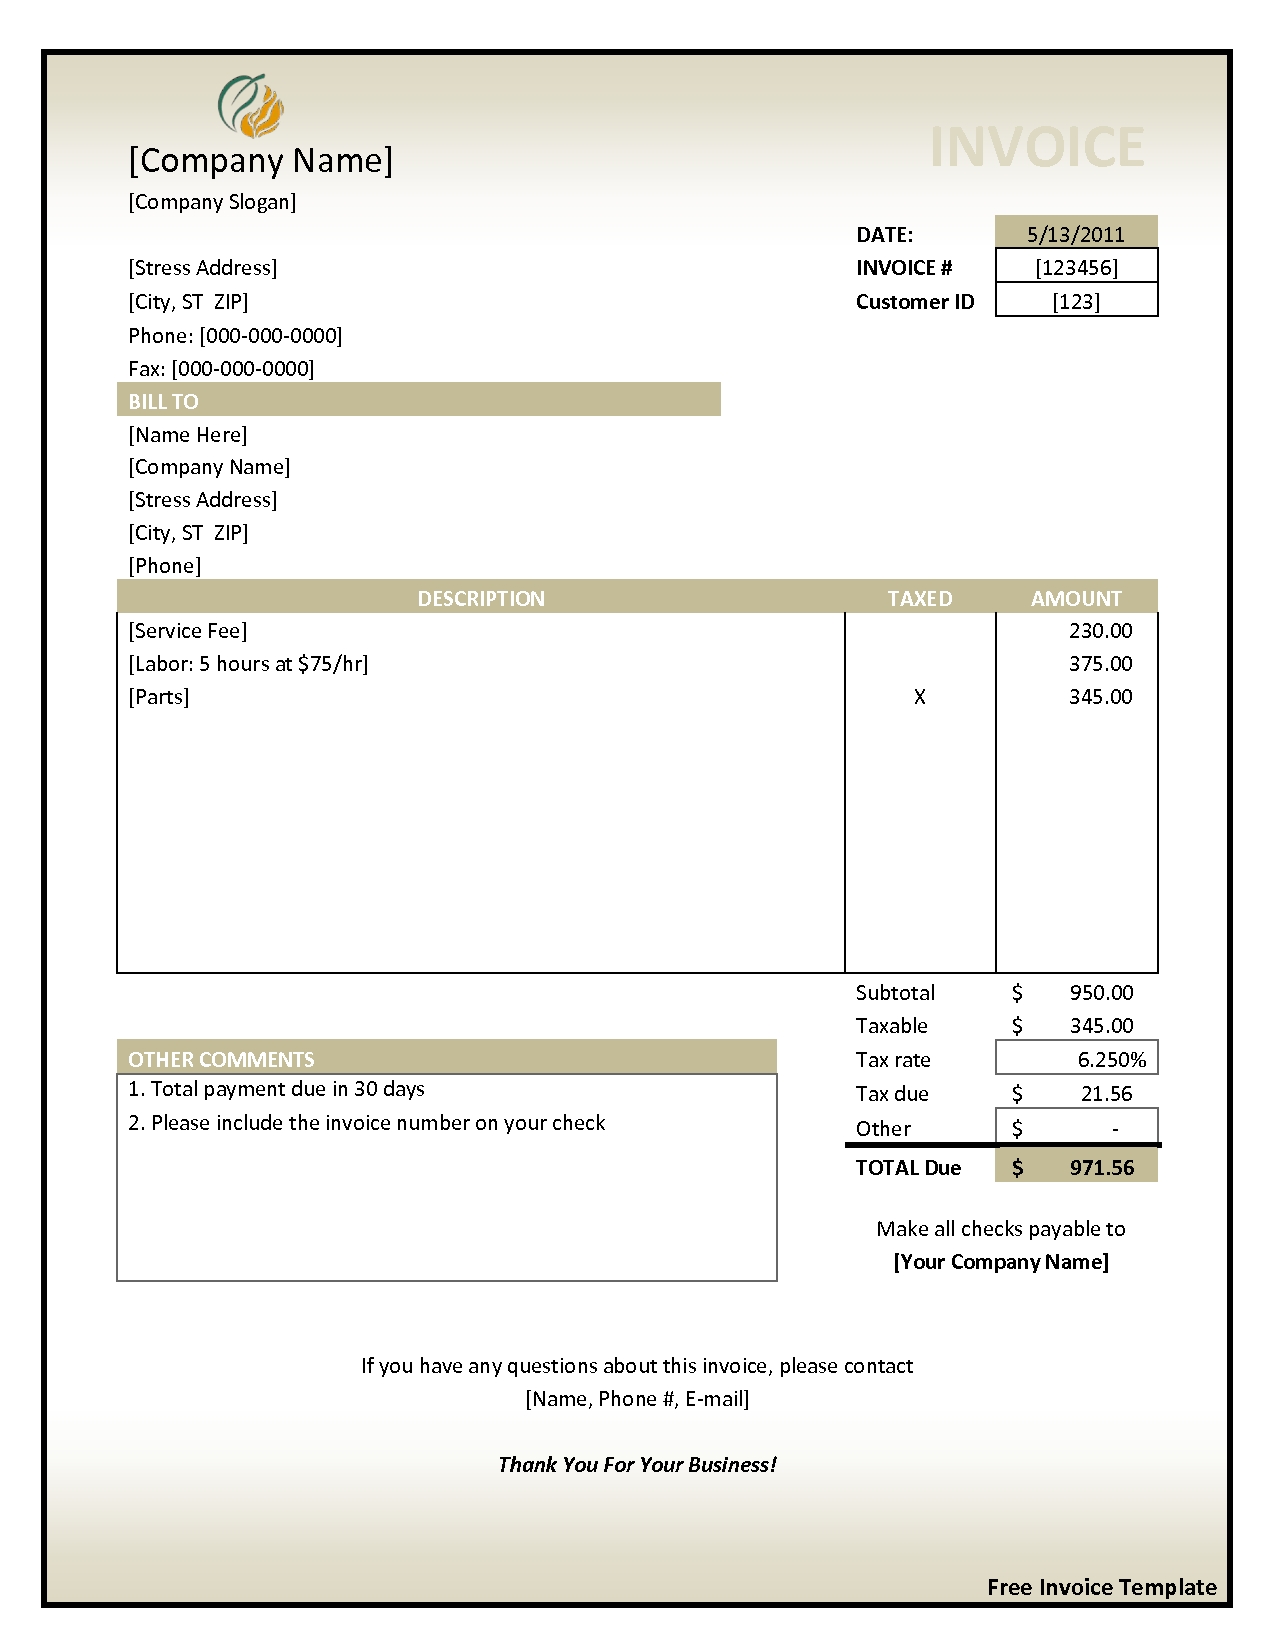 best invoice template free resume templates 2017 invoice templates free